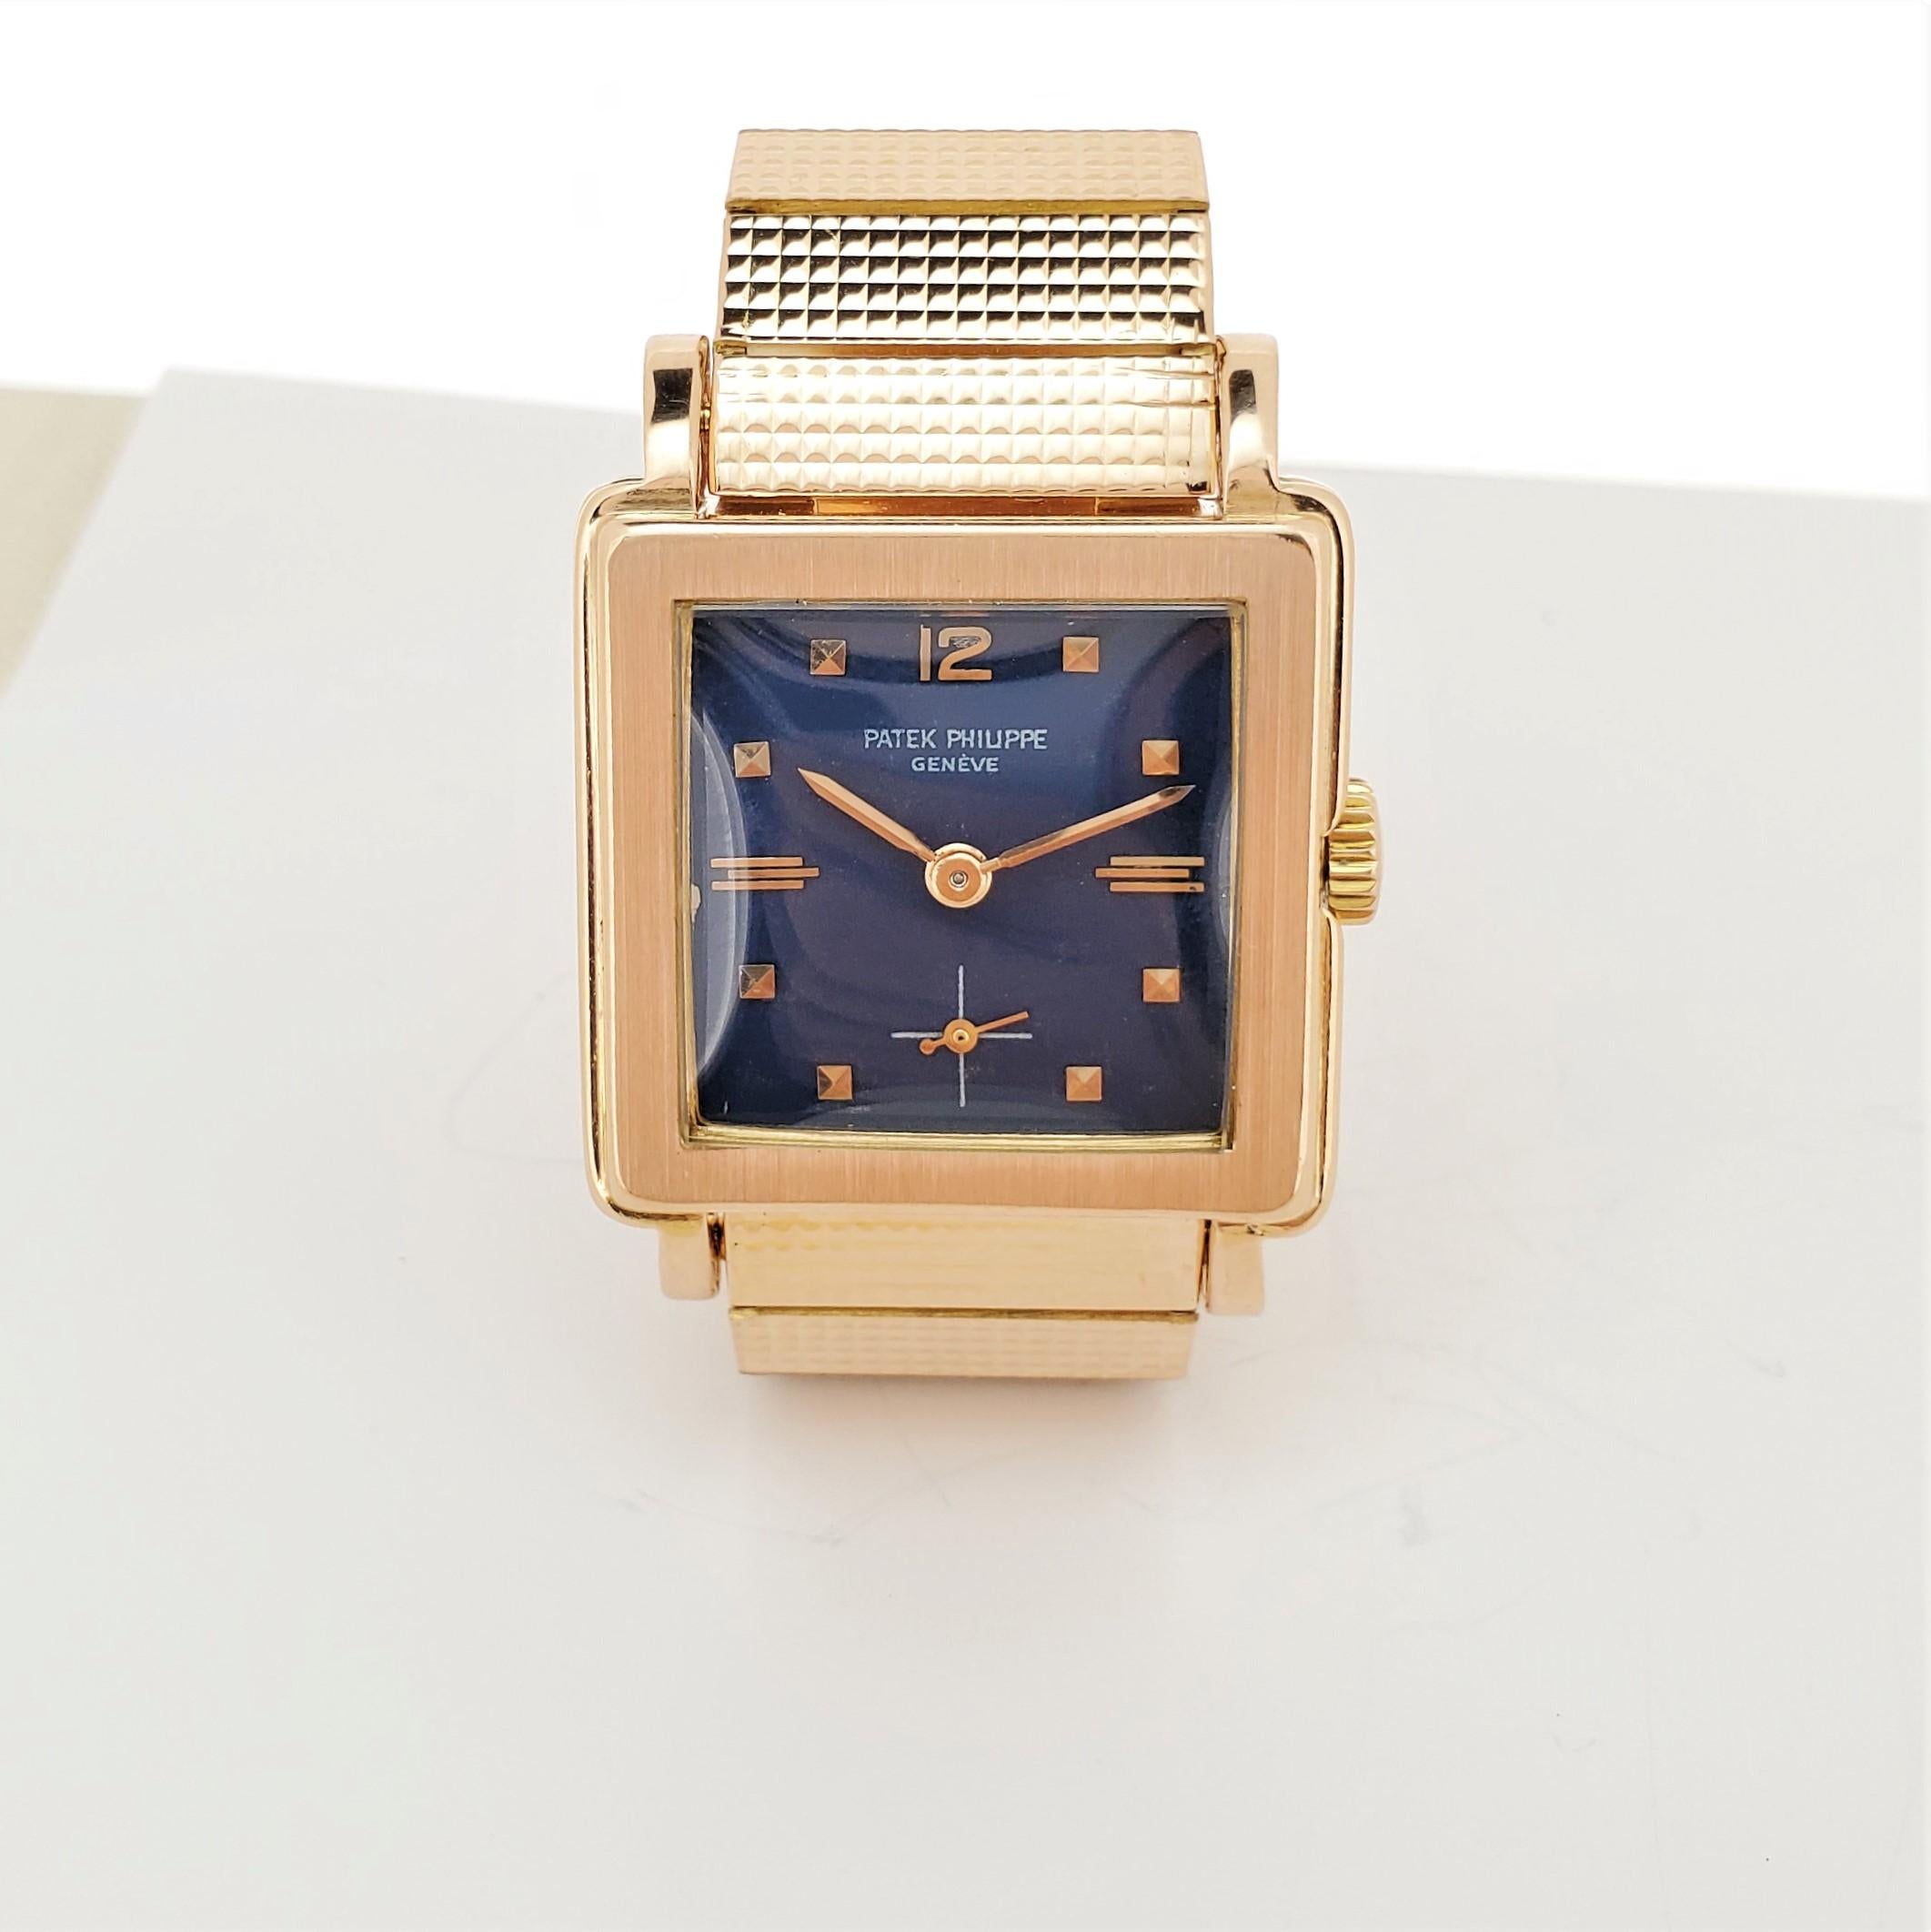 Introduction:
Patek Philippe 2529R Vintage square shaped rose gold bracelet watch.  The watch measures 28 x 37 mm and is made in 18 Karat rose gold,  with deep royal blue dial and raised gold hour markers.  The watch is fitted with a 10